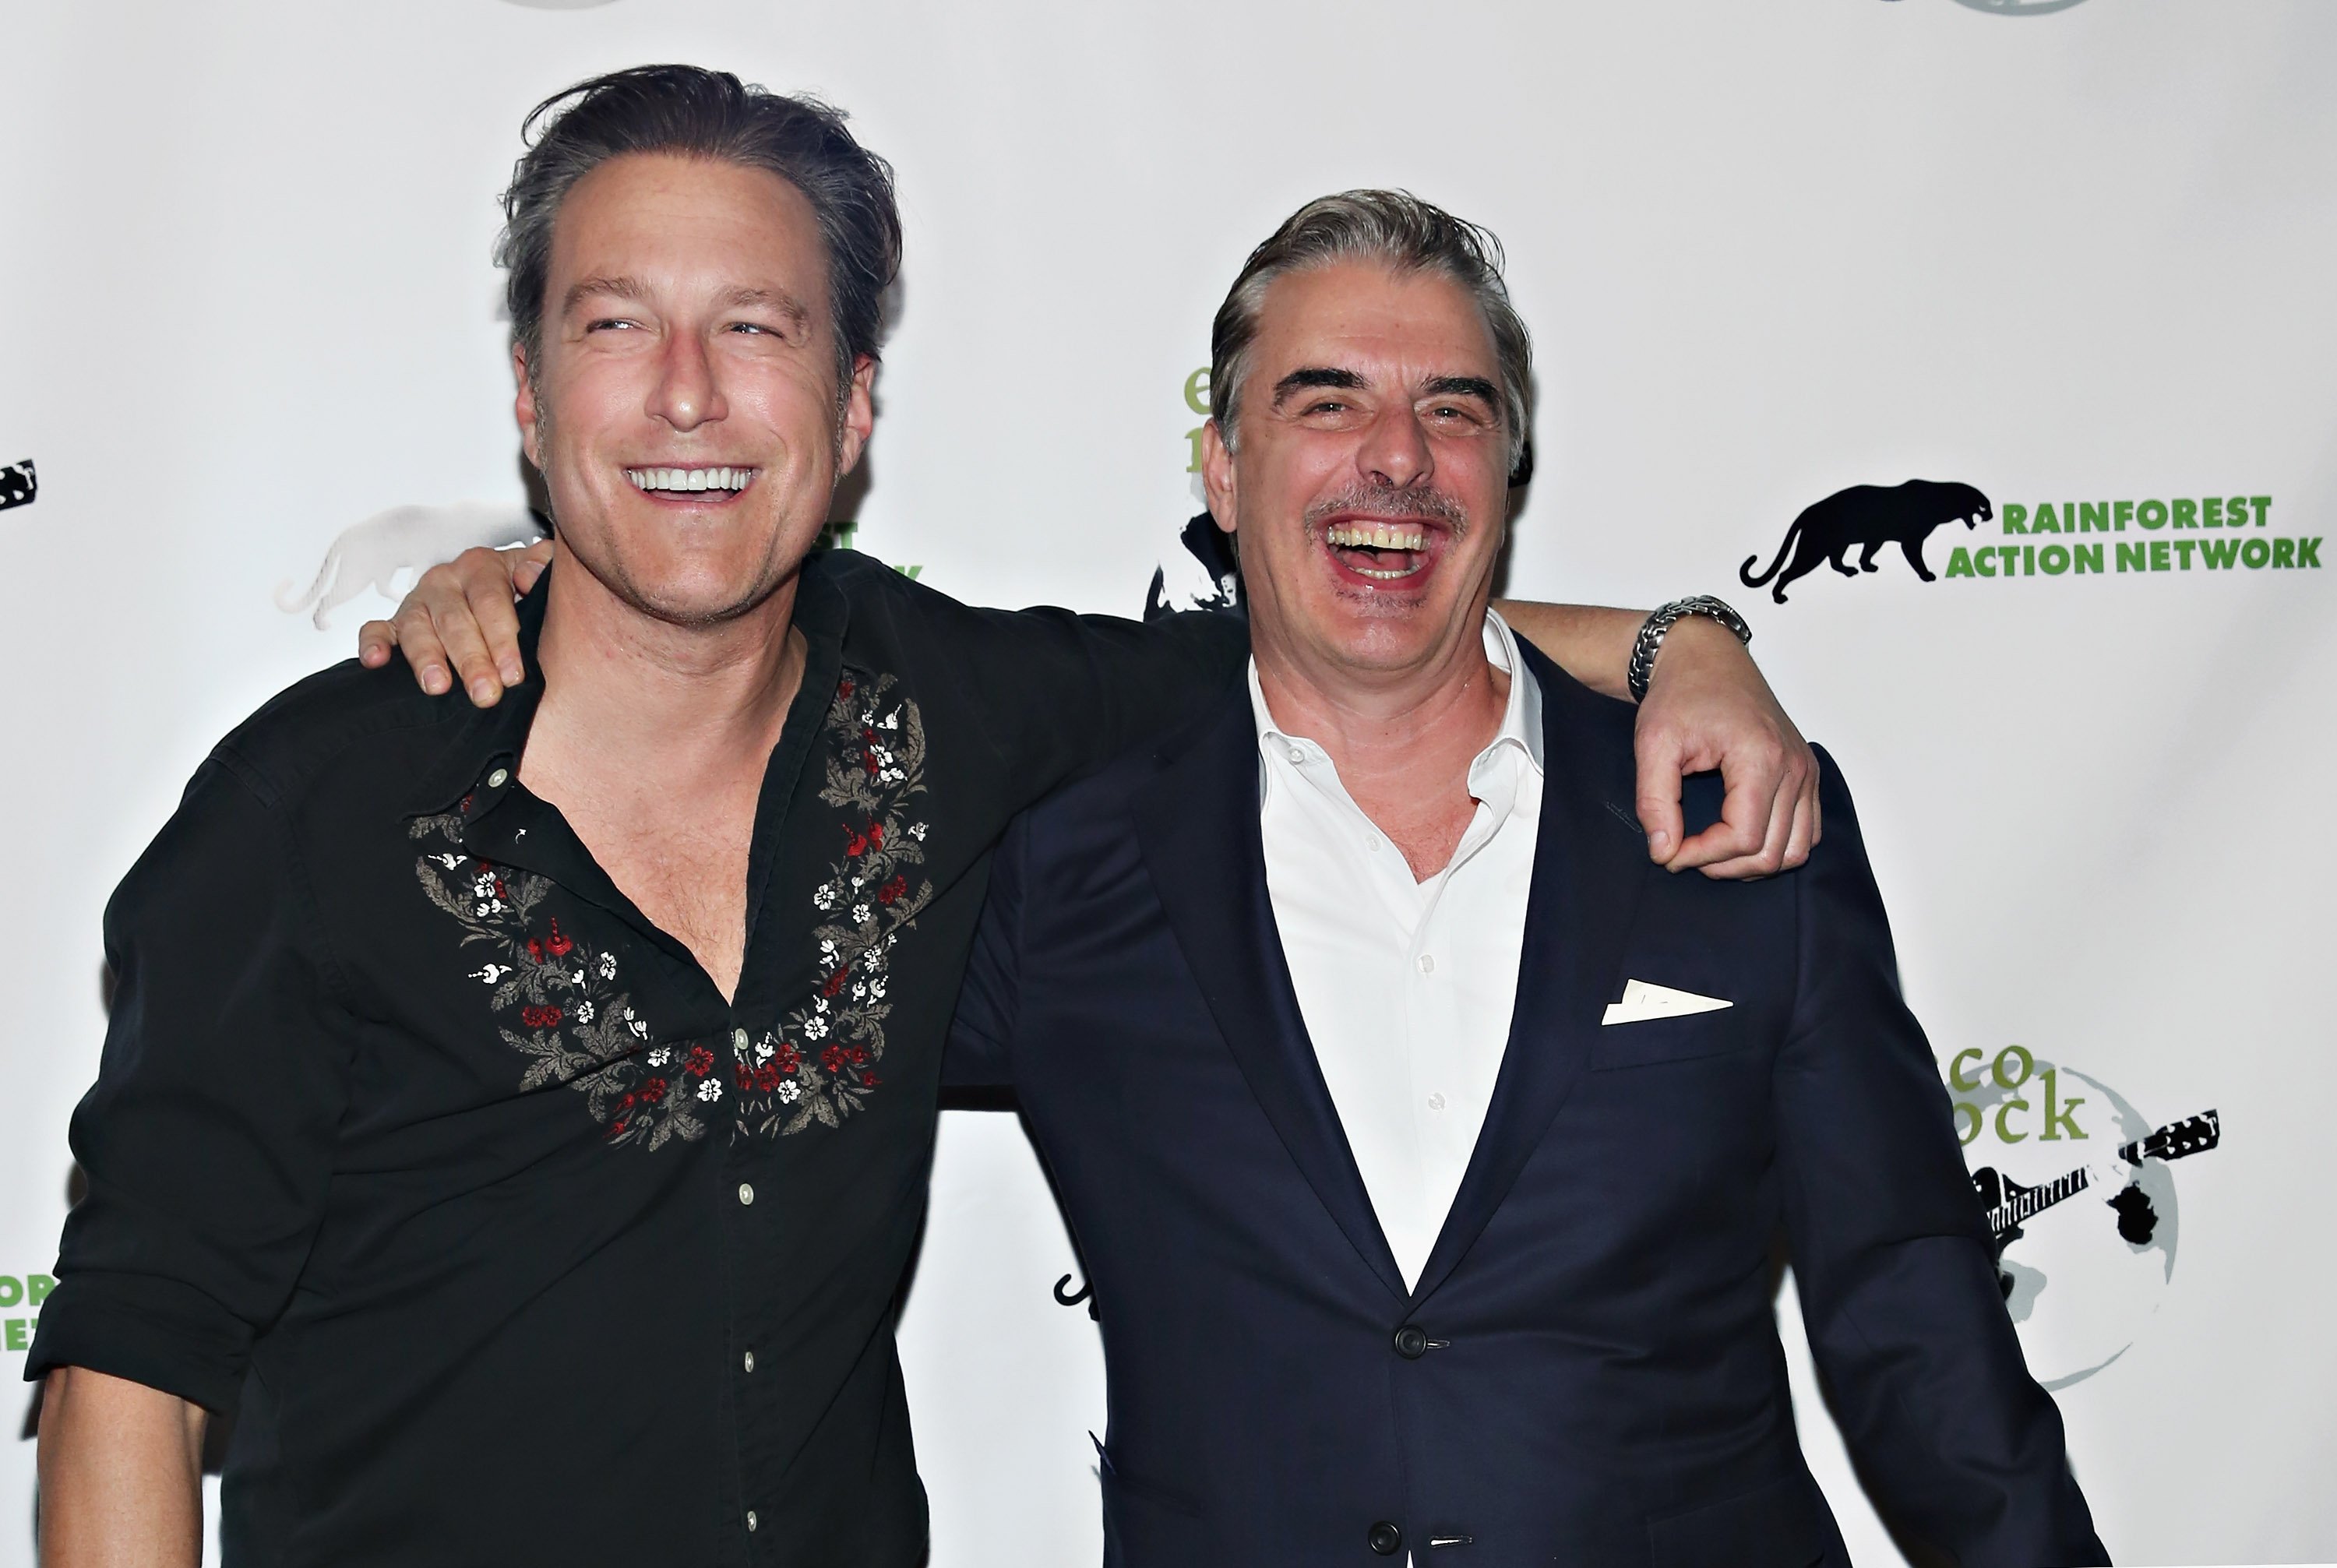 John Corbett and Chris Noth pose together on the red carpet for 2016 Eco Rock